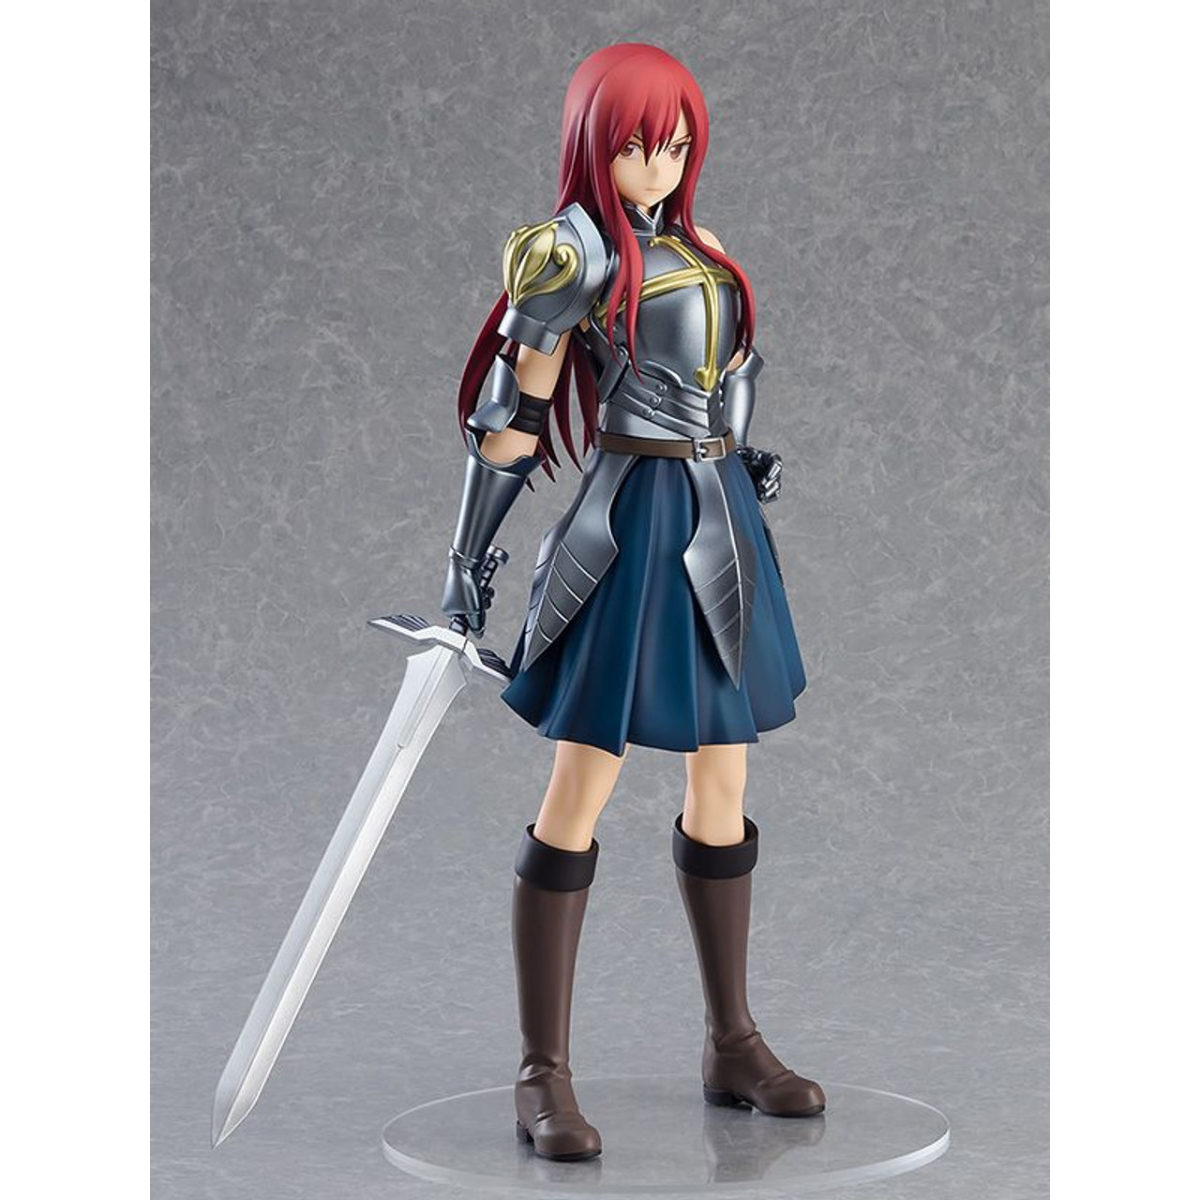 Fairy Tail Pop Up Parade XL "Erza Scarlet"-Good Smile Company-Ace Cards & Collectibles